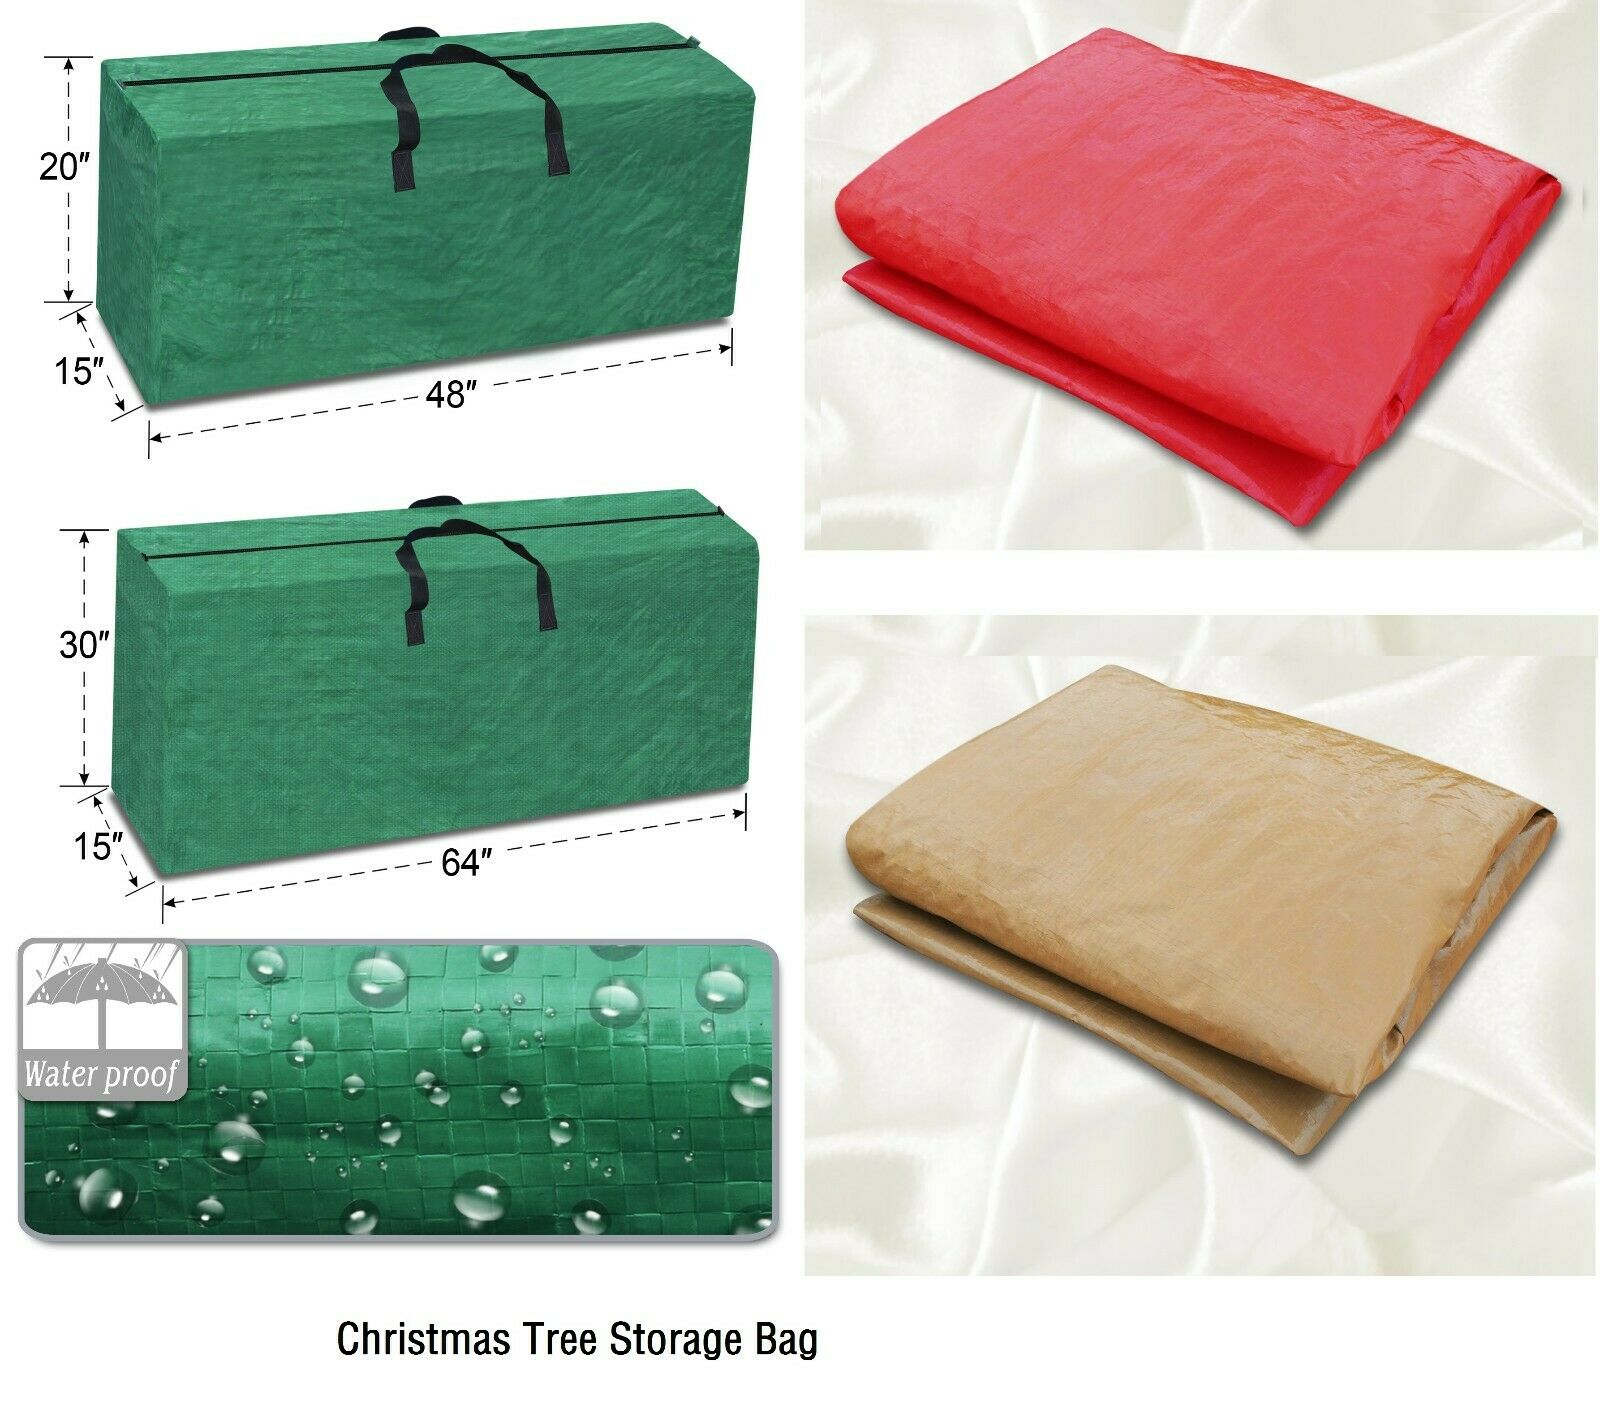 Heavy Duty Large Artificial Christmas Tree Storage Bag For Holiday Clean Up